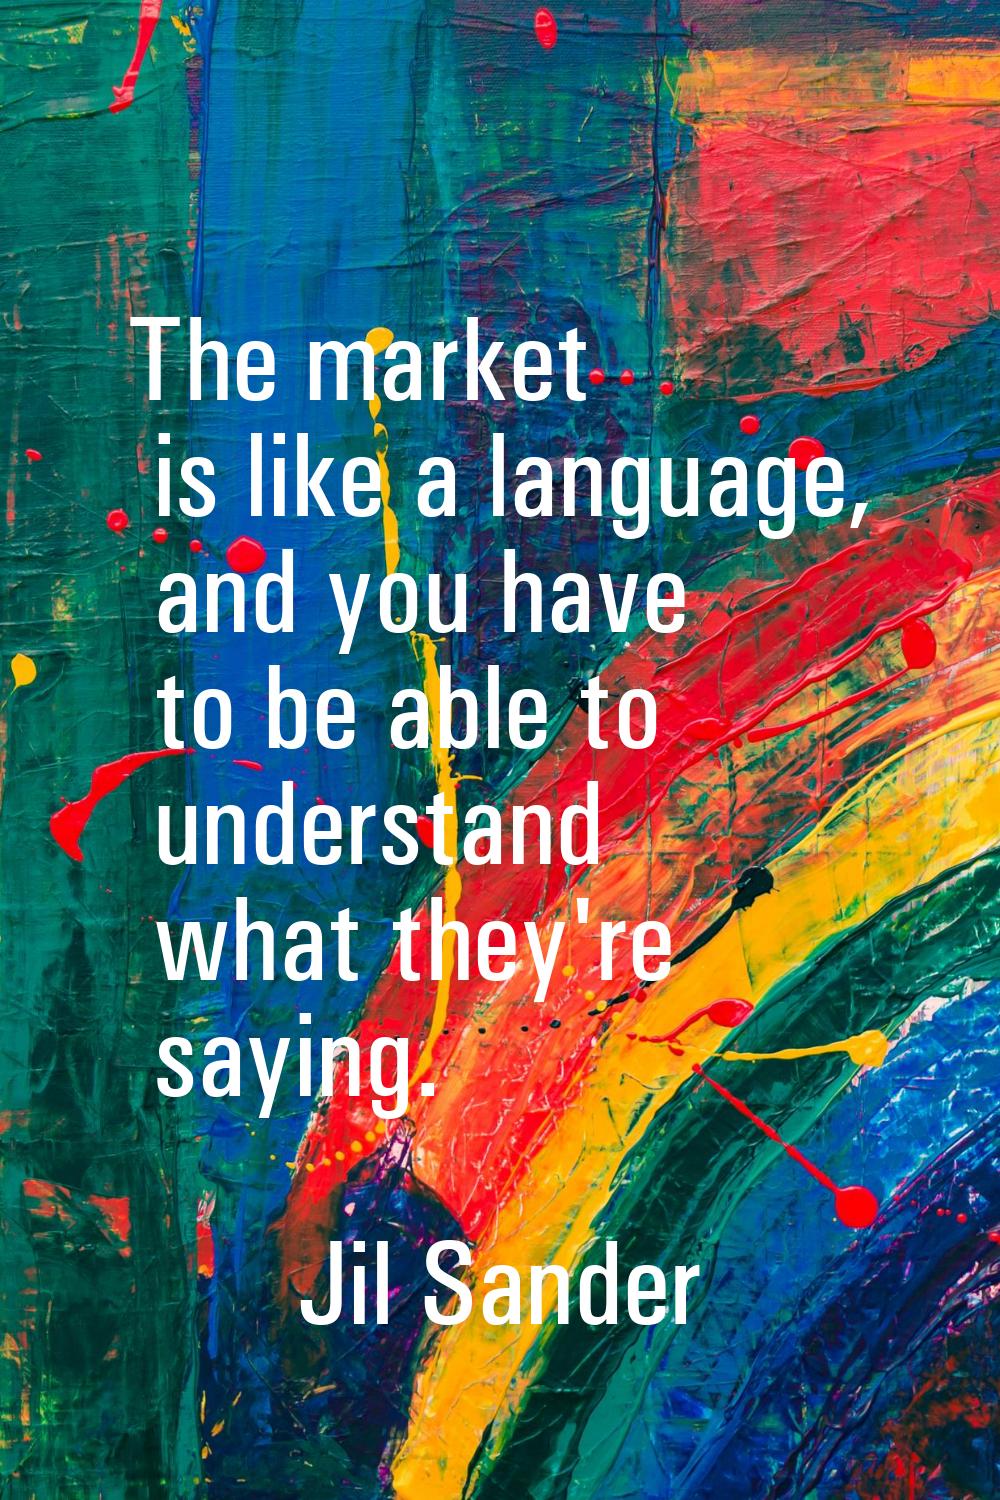 The market is like a language, and you have to be able to understand what they're saying.